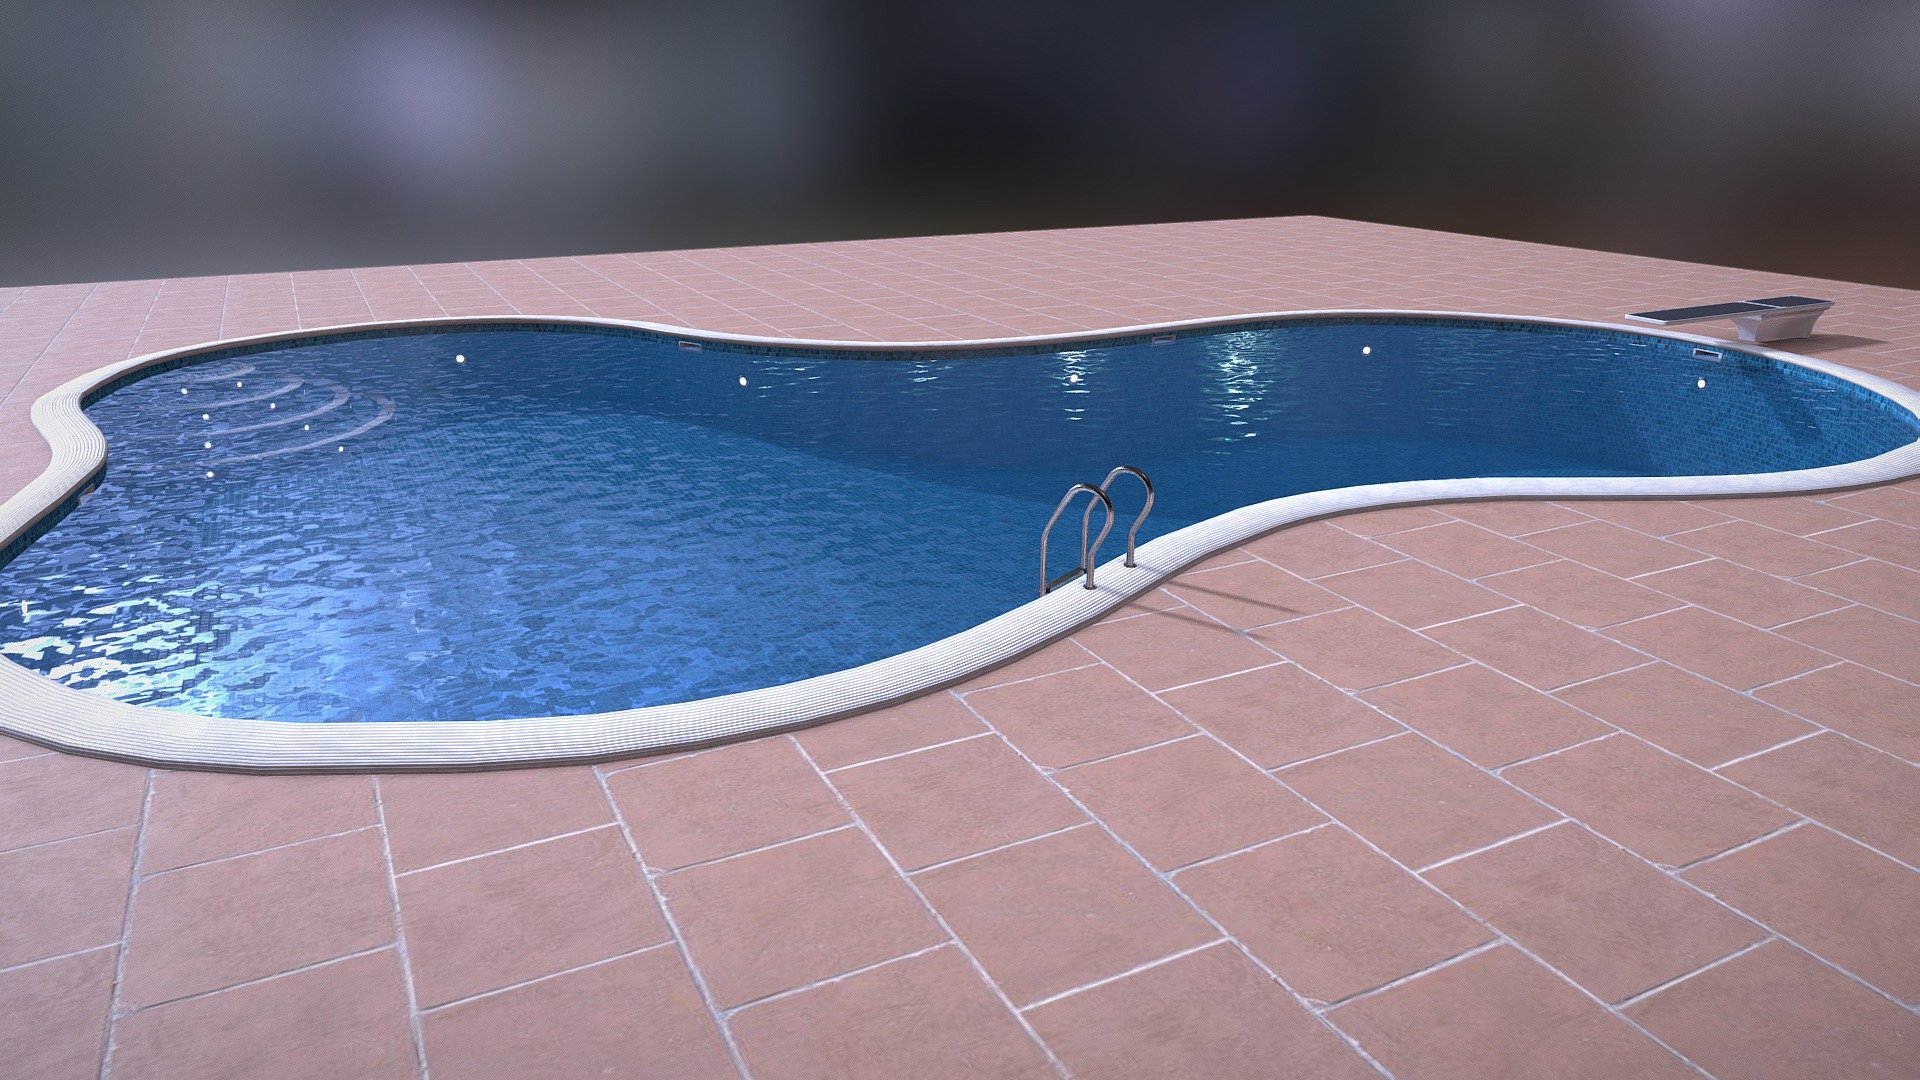 Curved Swimming pool with ladder and diving board. 

Low Poly Swimming pool.
Perfect for a private homes or public envionments.
All sections of the model are UV mapped apart from the swimming pool interior which is tiled.
The pool lights have emissive lighting 3d model